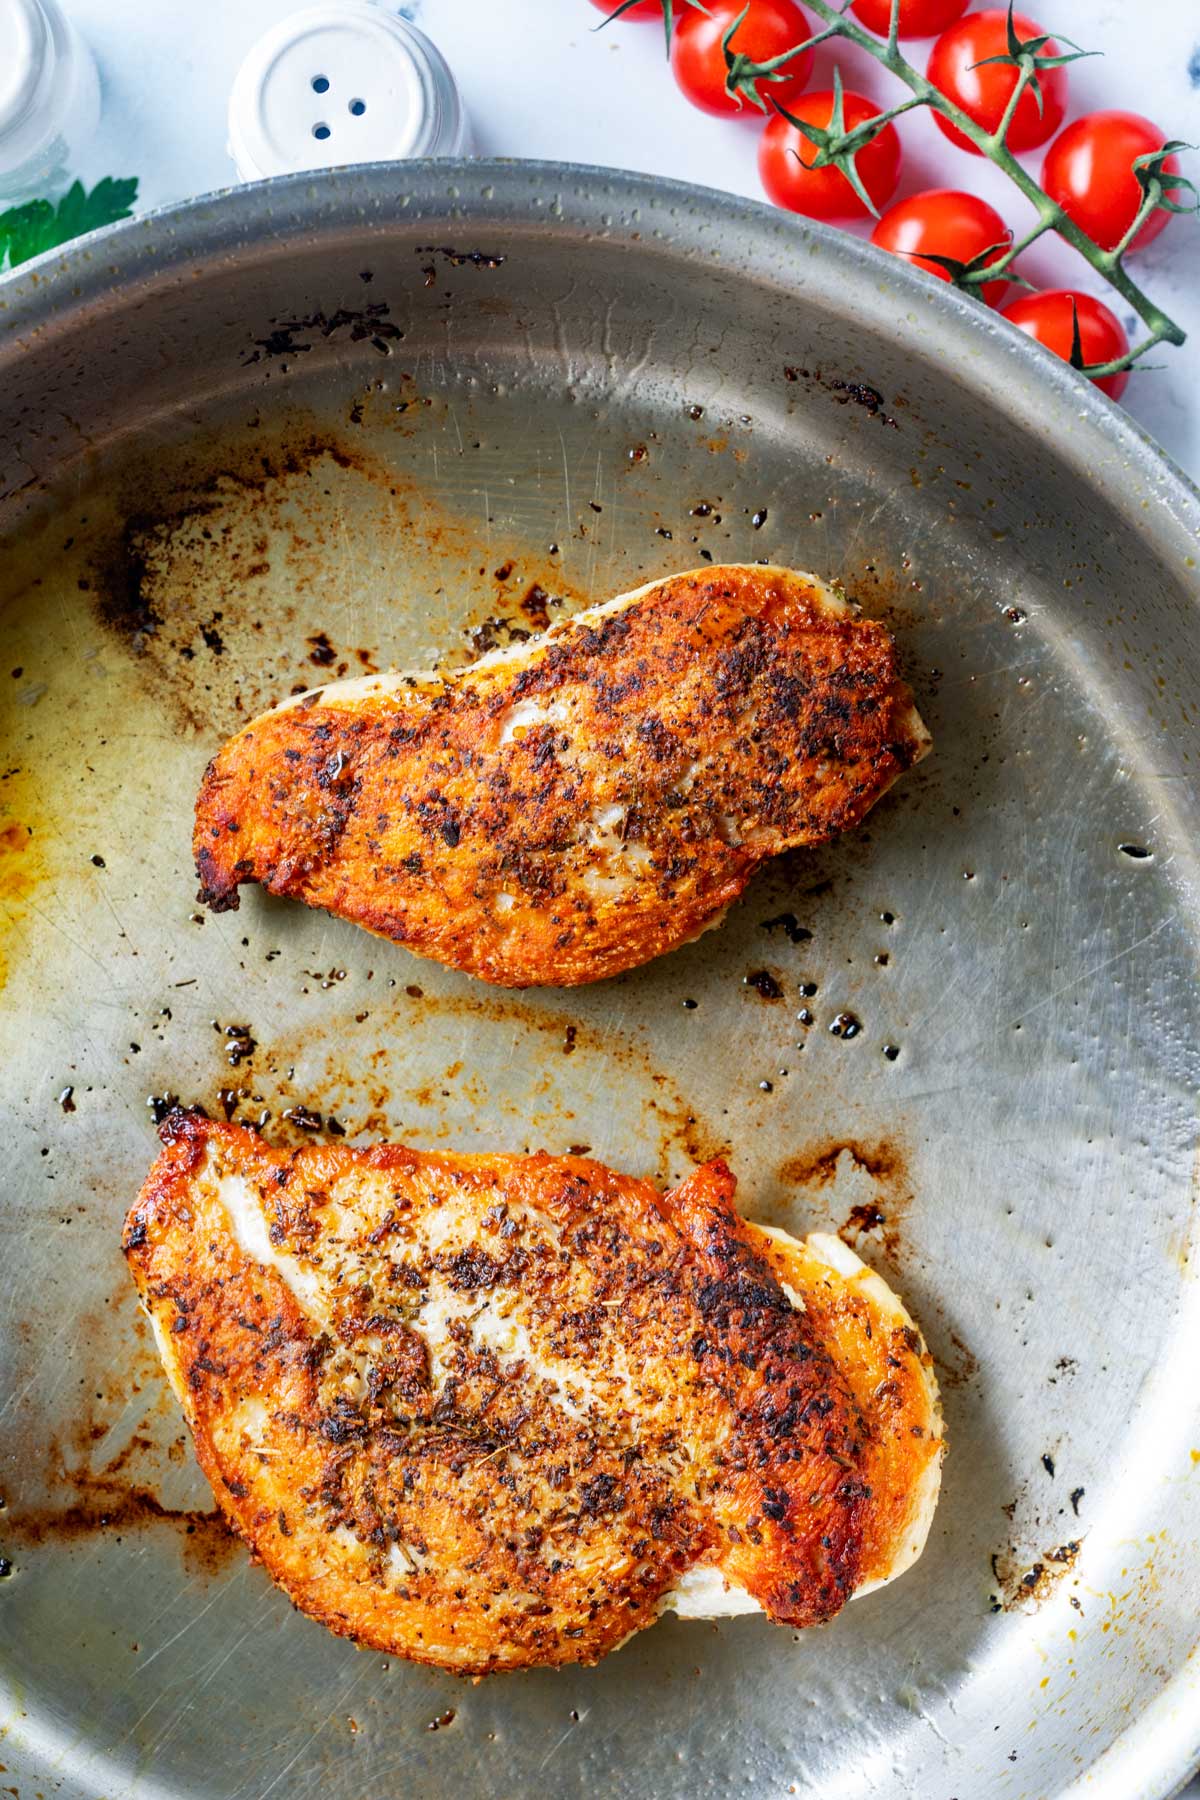 Photos of chicken being browned in a skillet.